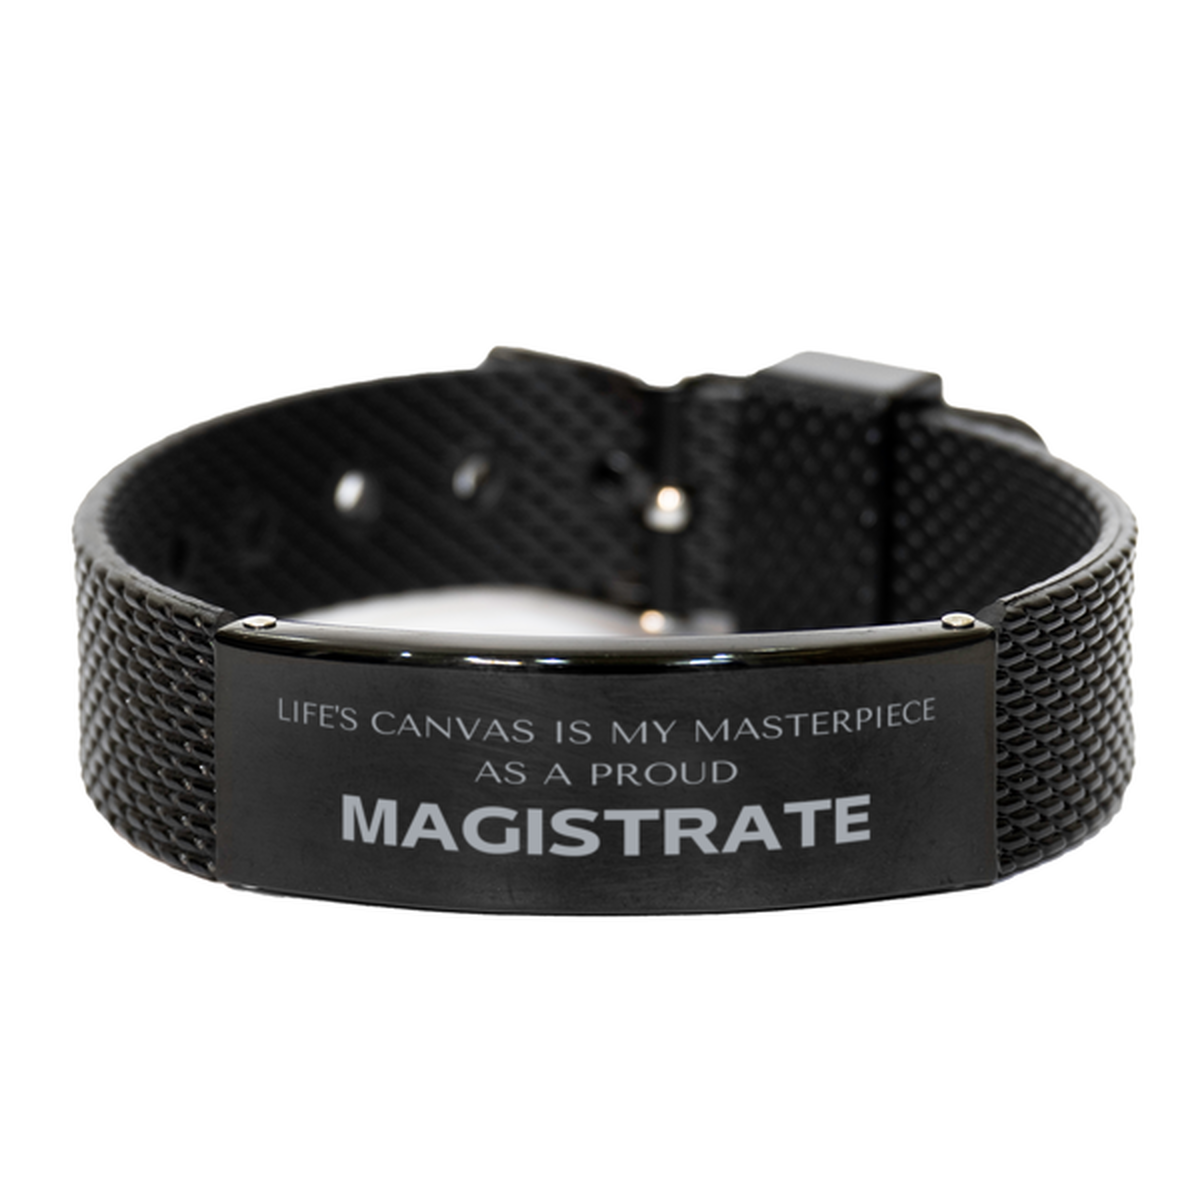 Proud Magistrate Gifts, Life's canvas is my masterpiece, Epic Birthday Christmas Unique Black Shark Mesh Bracelet For Magistrate, Coworkers, Men, Women, Friends